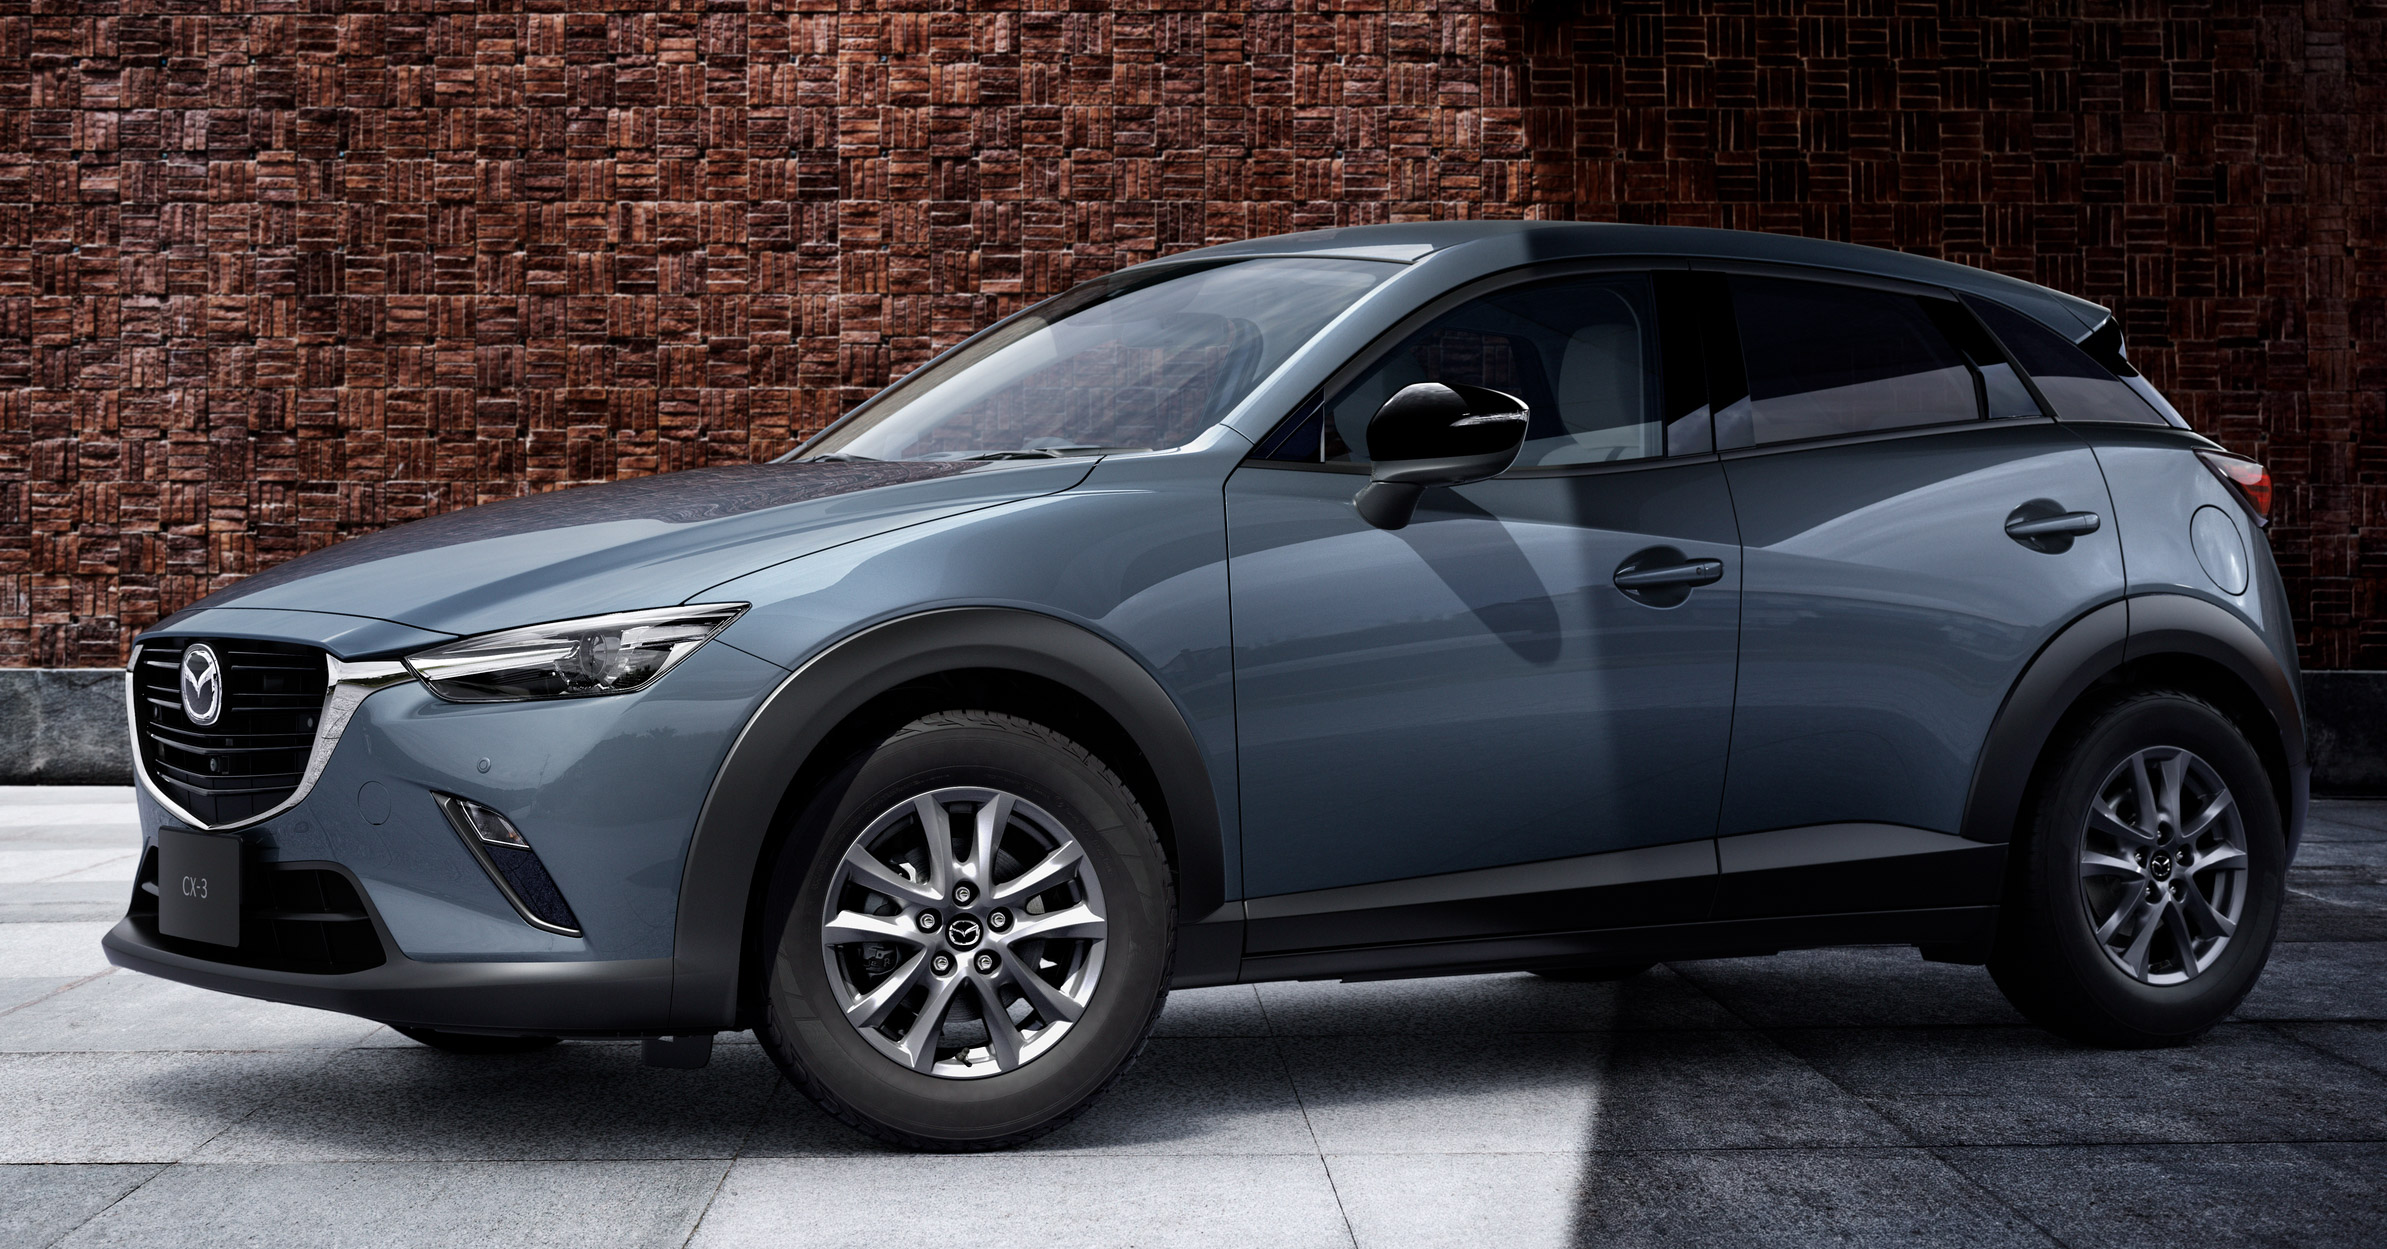 2021 Mazda CX-3 launched in Malaysia - now with AEB, LDW, Android Auto,  Apple CarPlay; from RM131k 